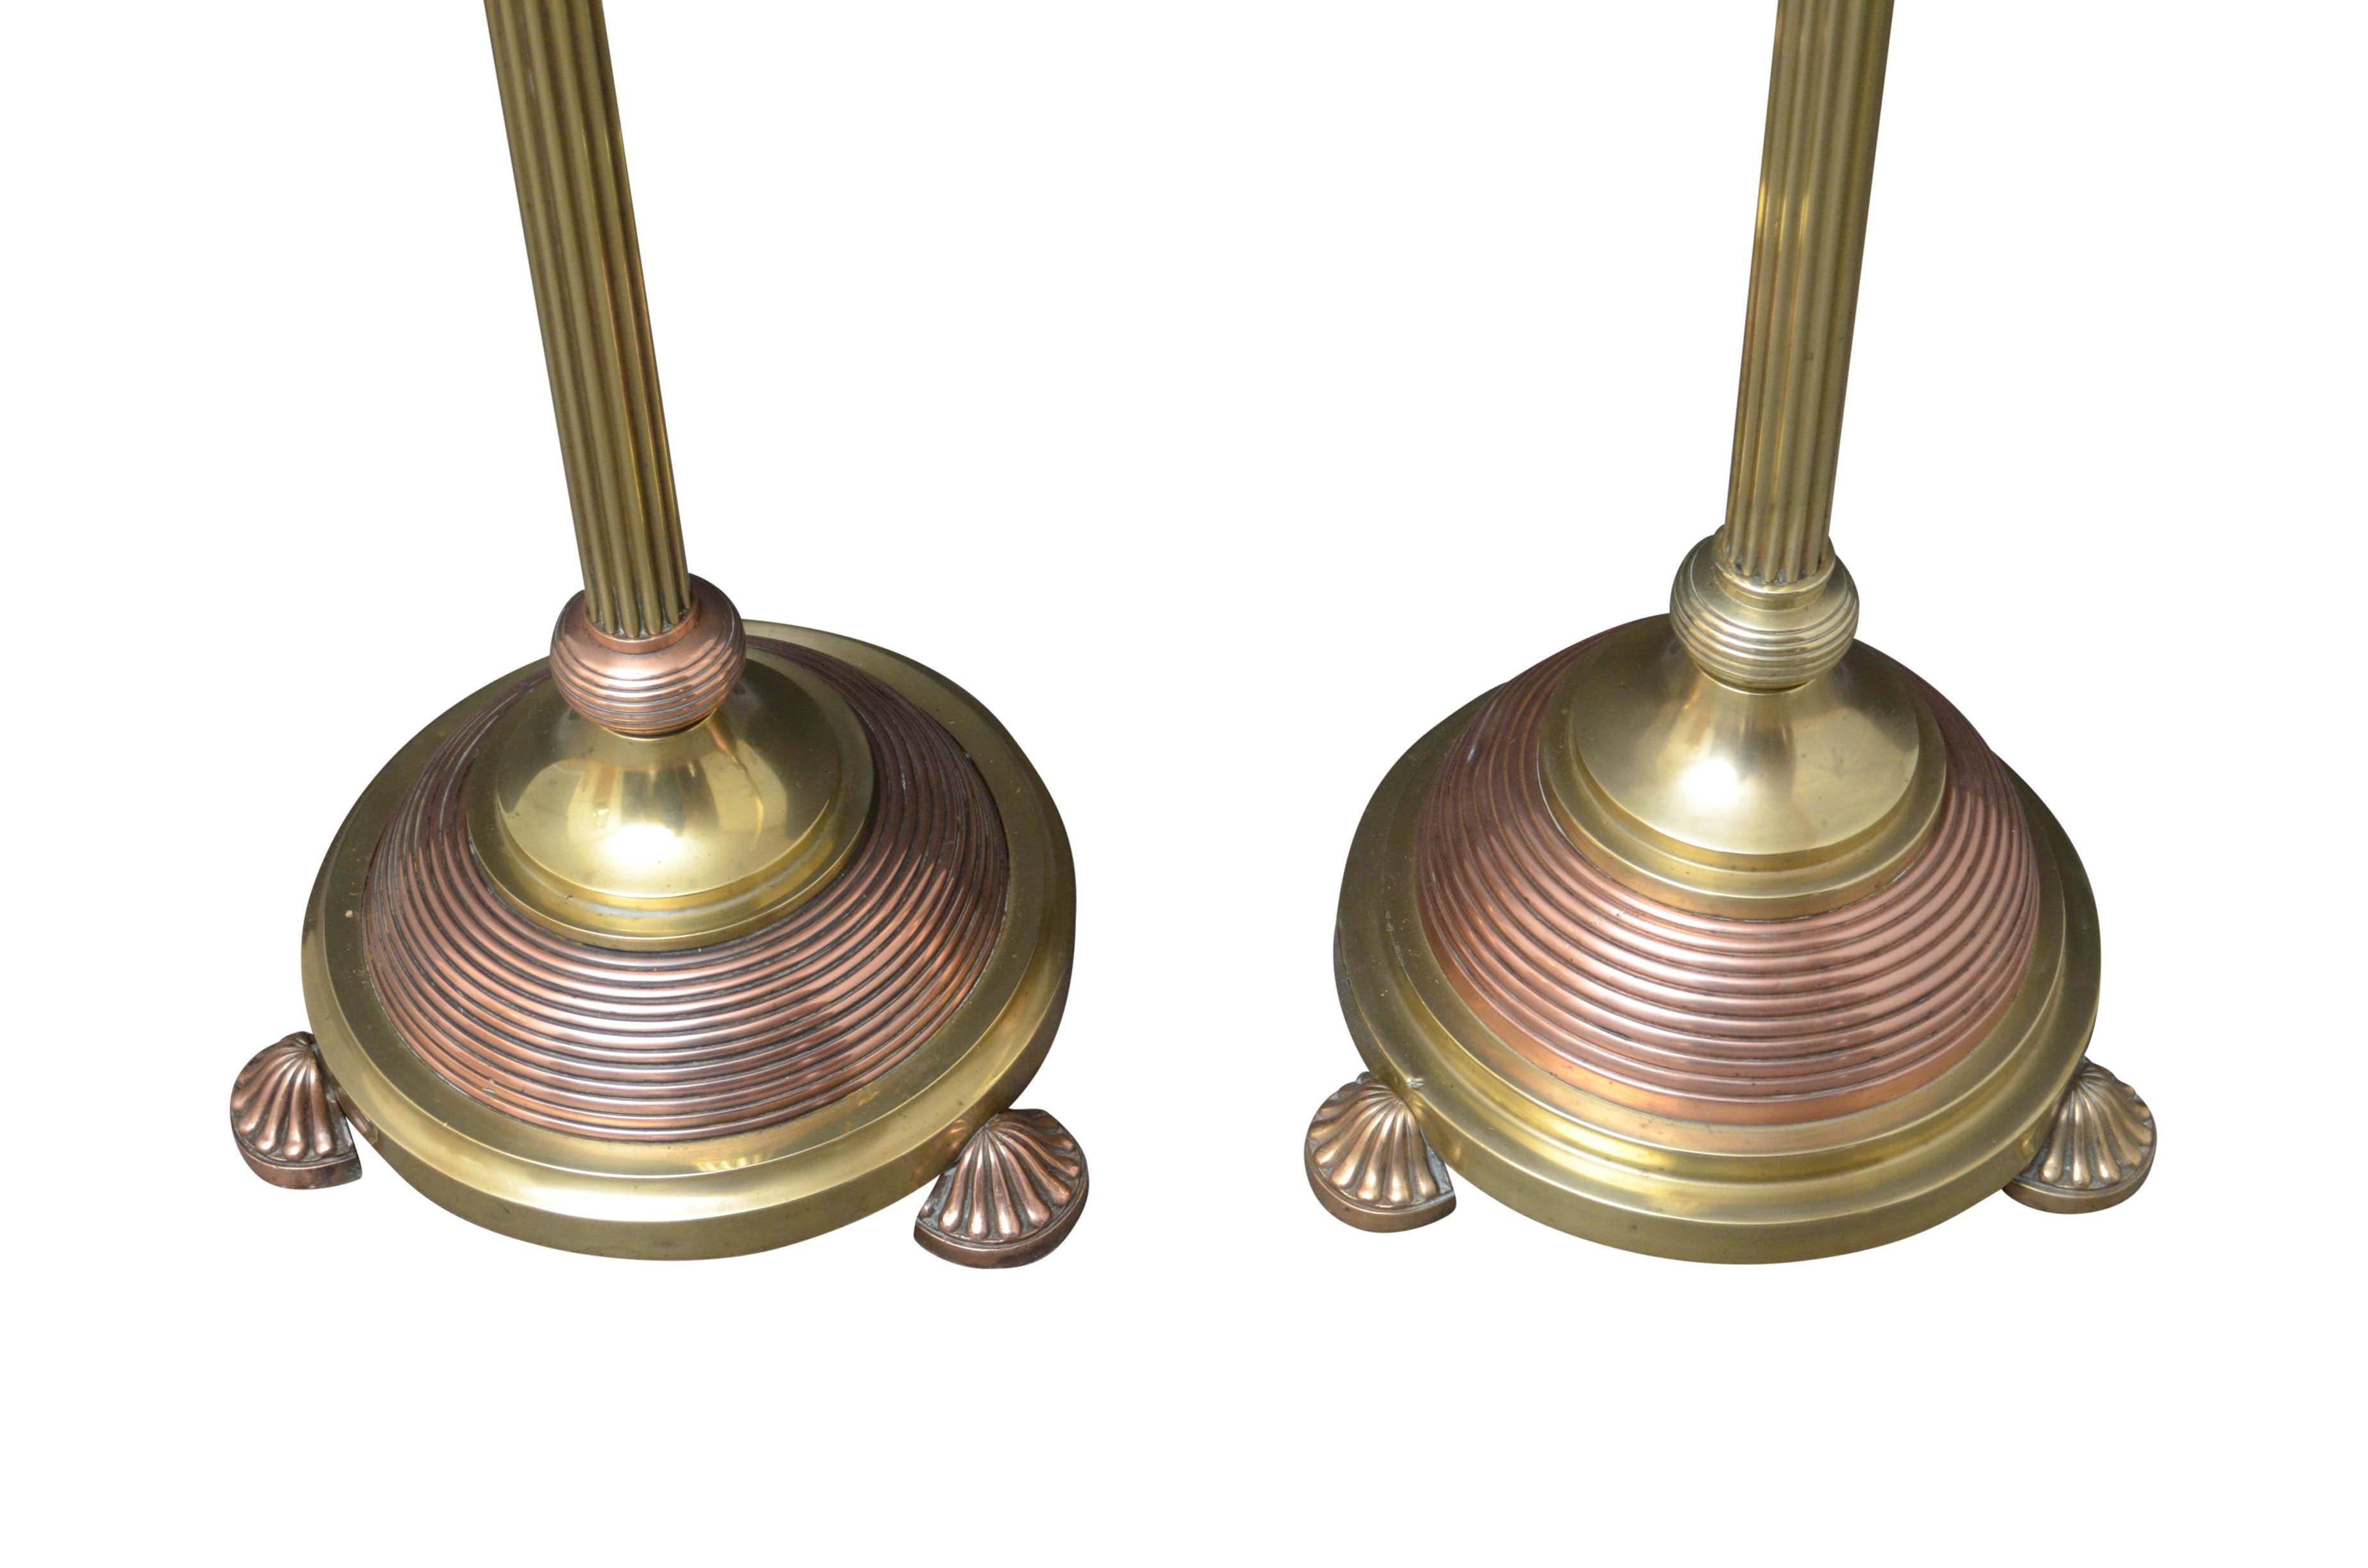 Matched Pair of Edwardian Copper And Brass Floor Standard Lamps 5